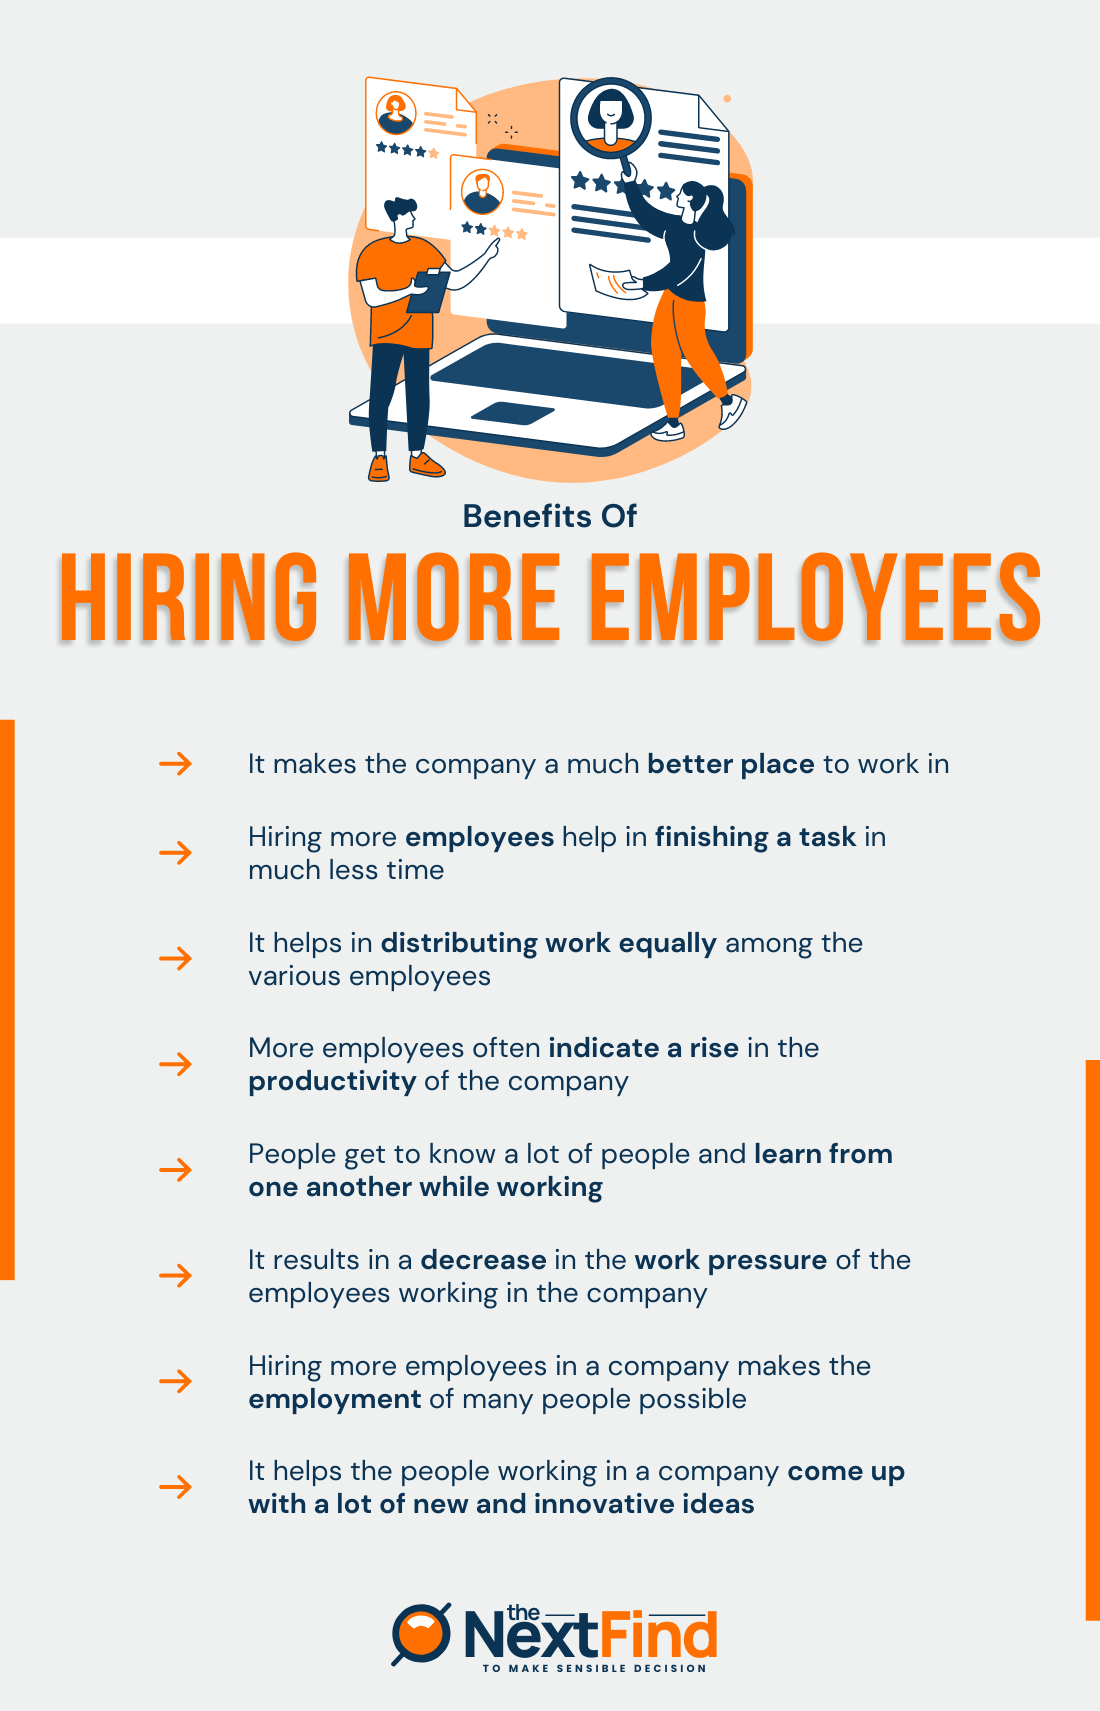 Benefits of Hiring More Employees